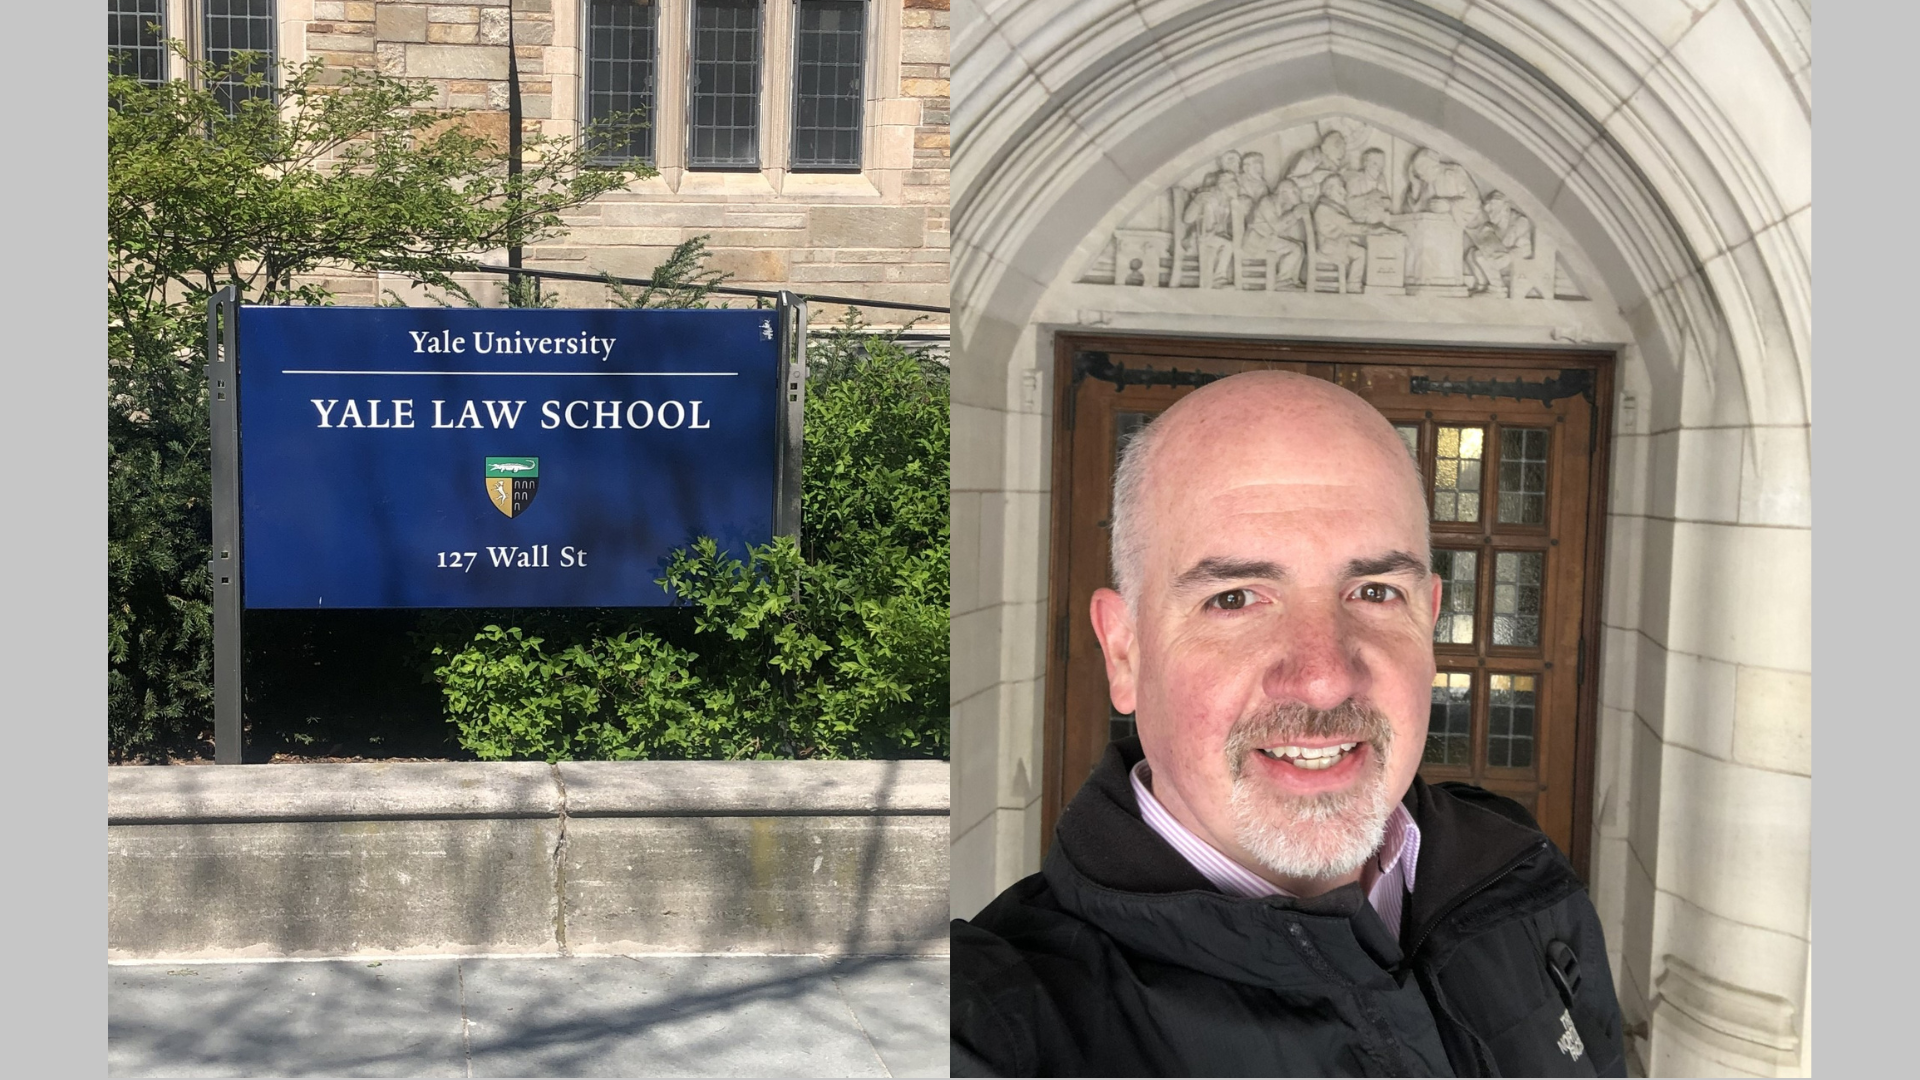 A sign that says Yale Law School and a selfie of a man in front of a building